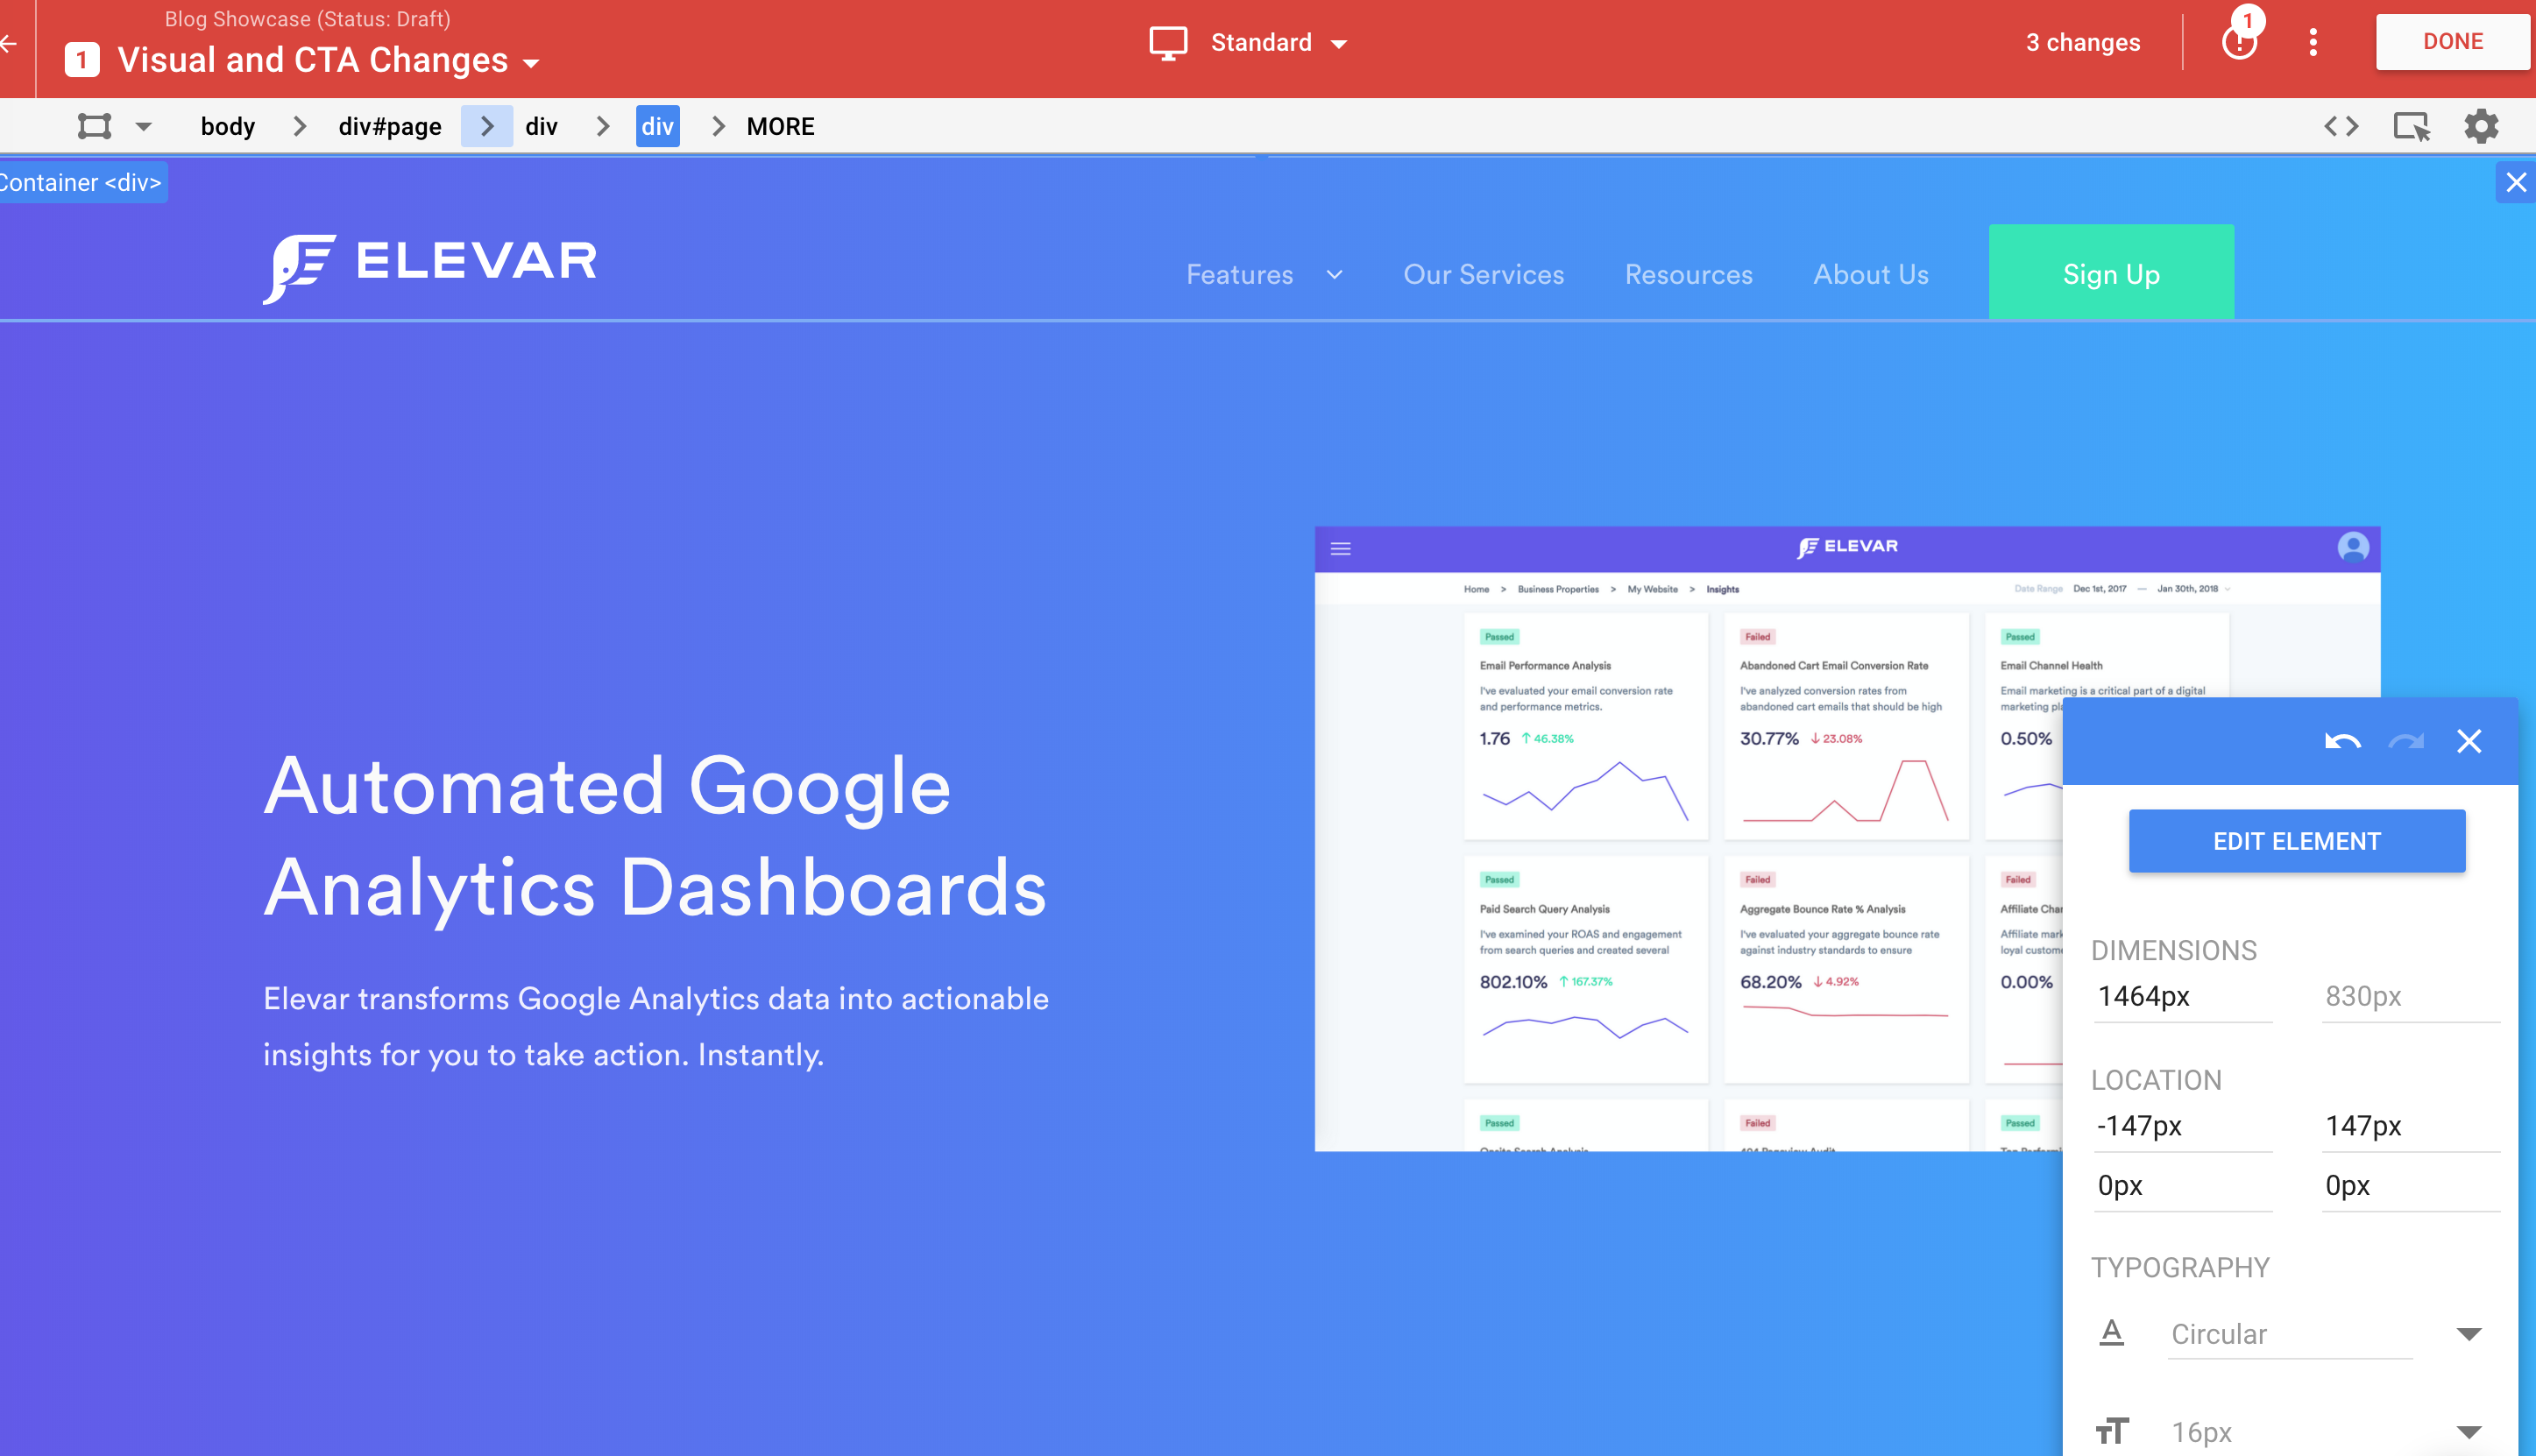 variant landing page